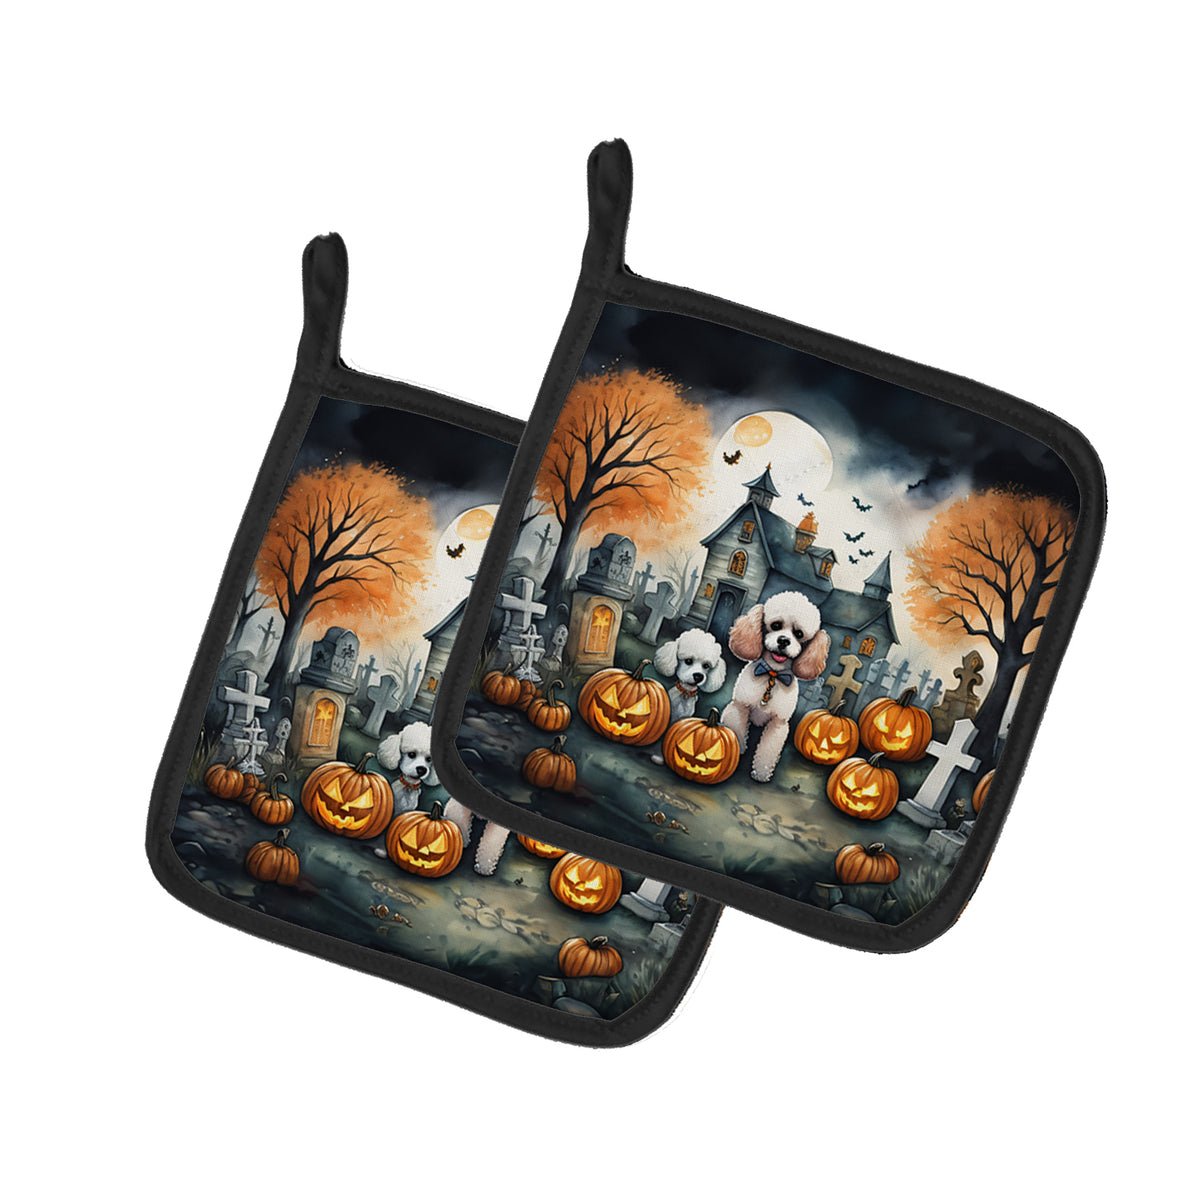 Buy this Poodle Spooky Halloween Pair of Pot Holders